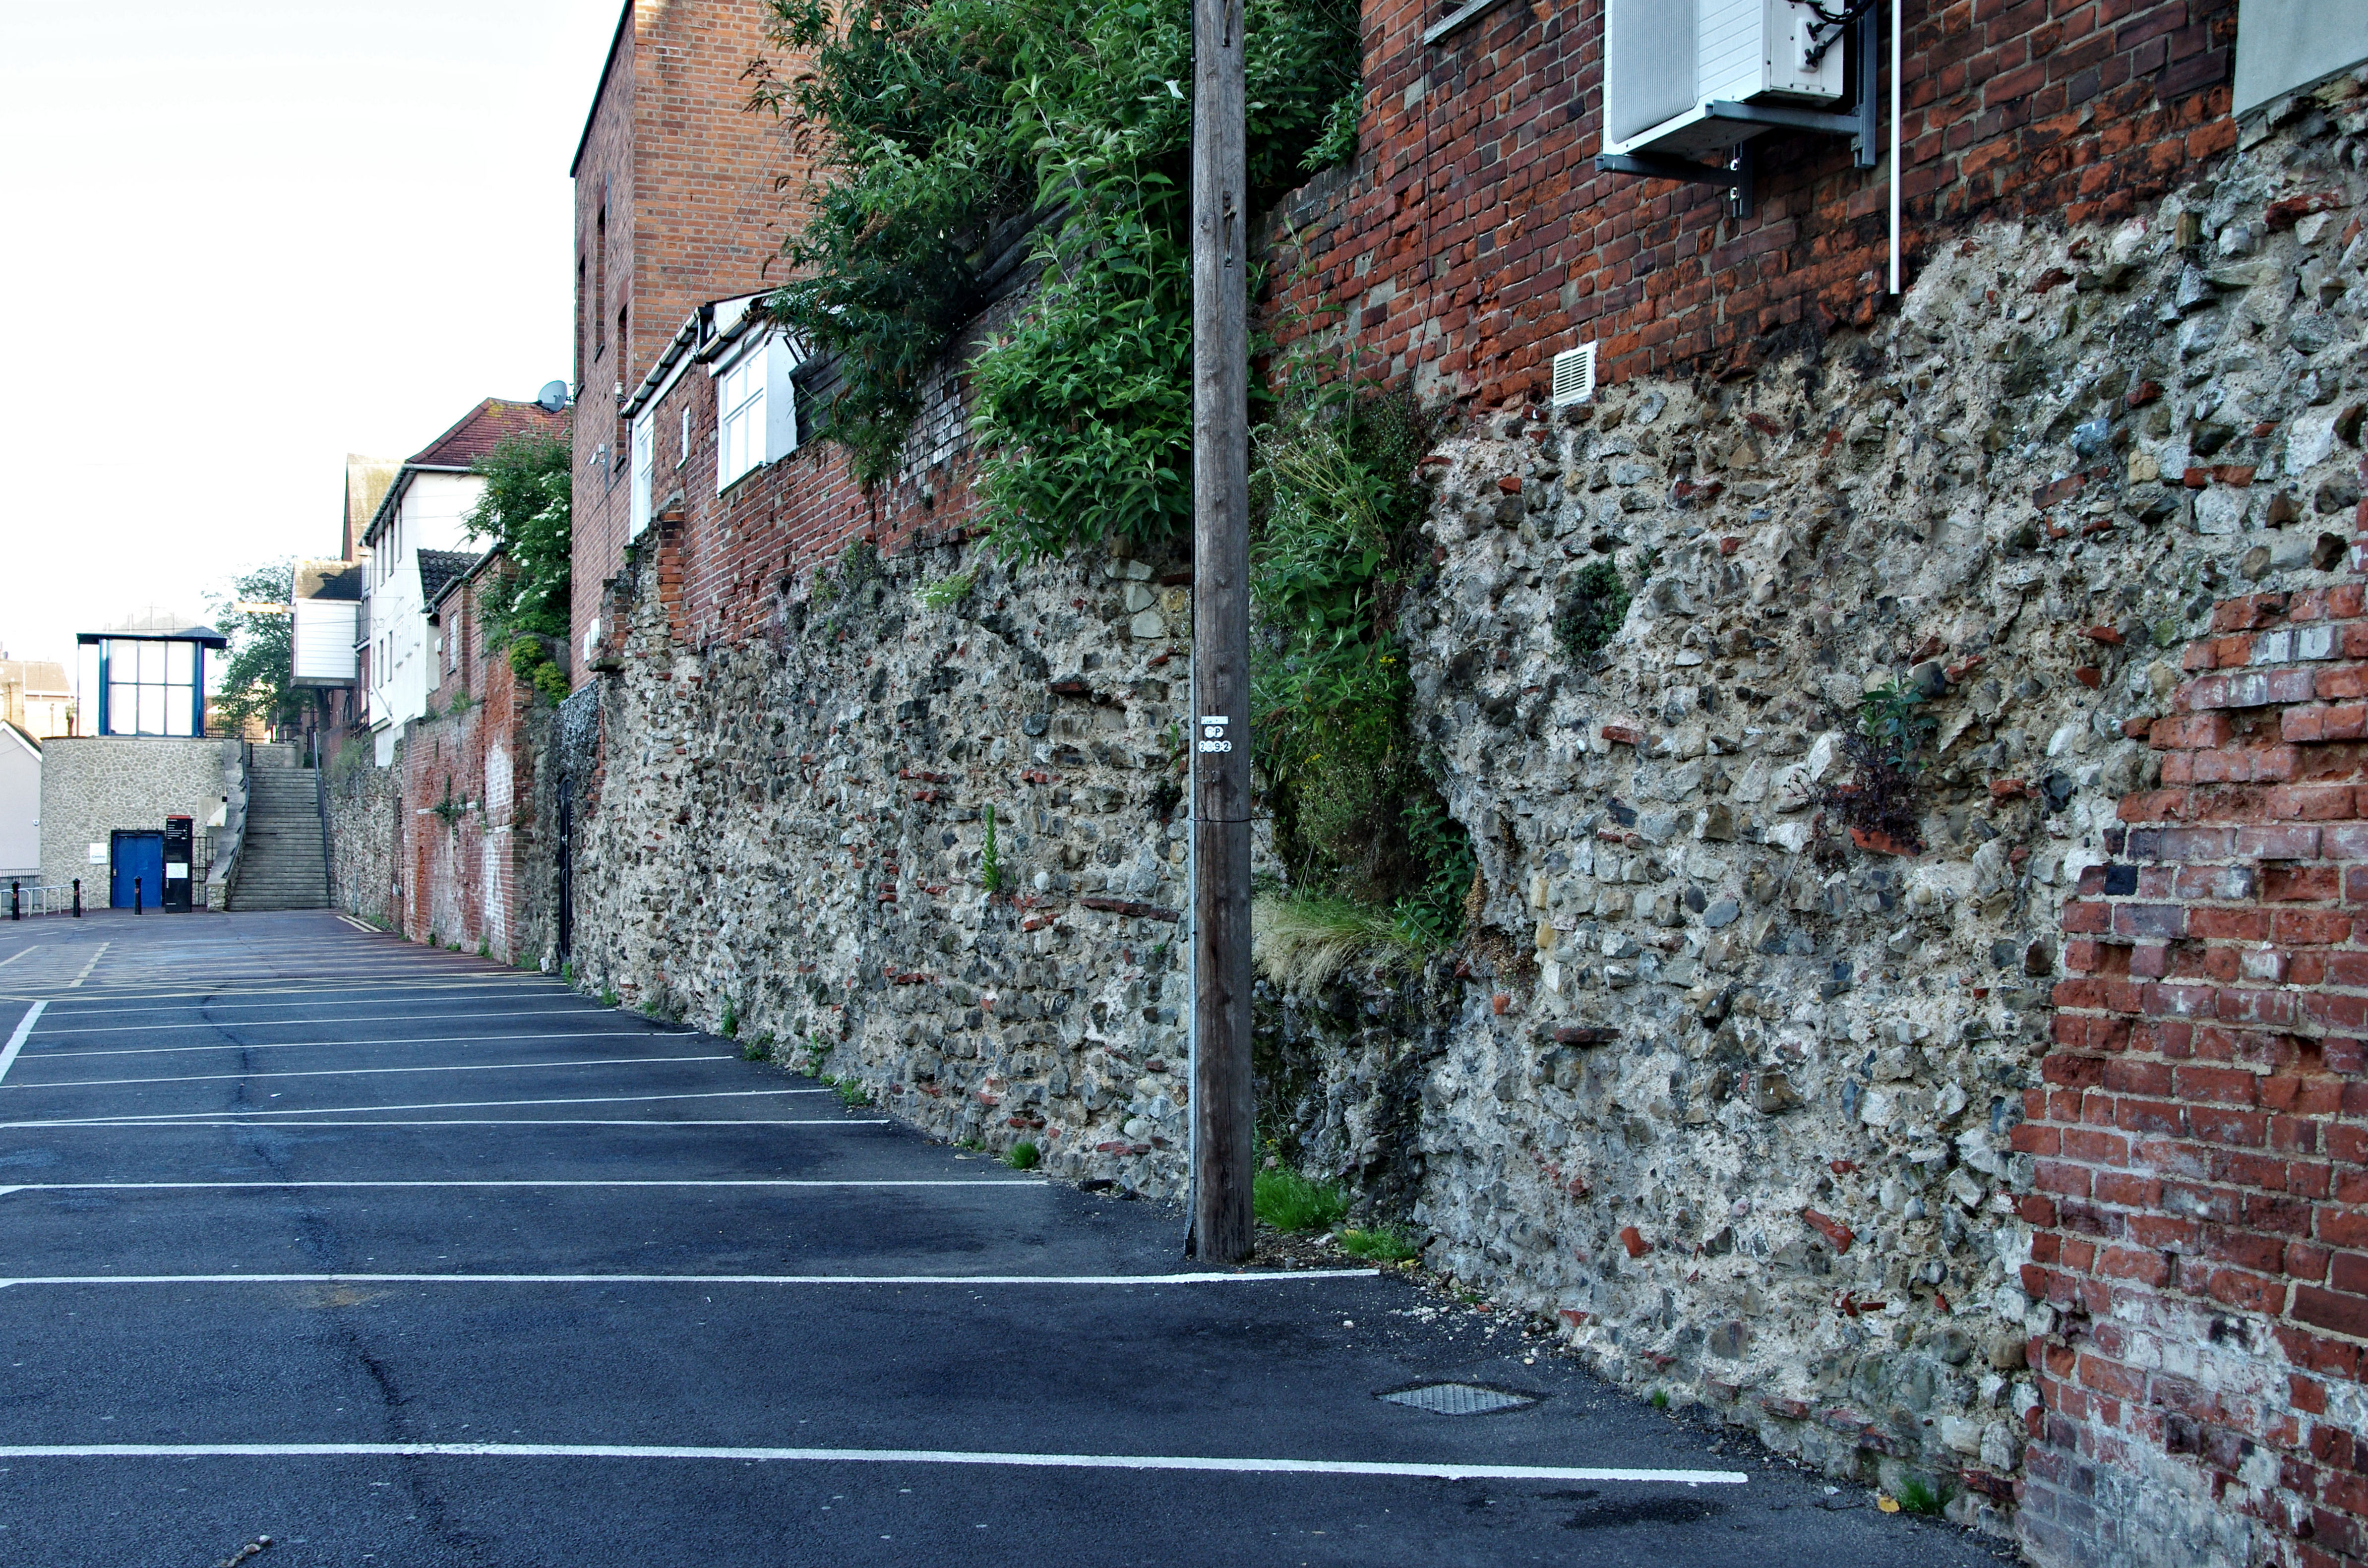 "Roman Wall" remaining in Colchester (2014-05-24.). Forty-five years ago, I lived in the opposite side of this public car park. コルチェスターに遺る ”ローマン・ウォール”。